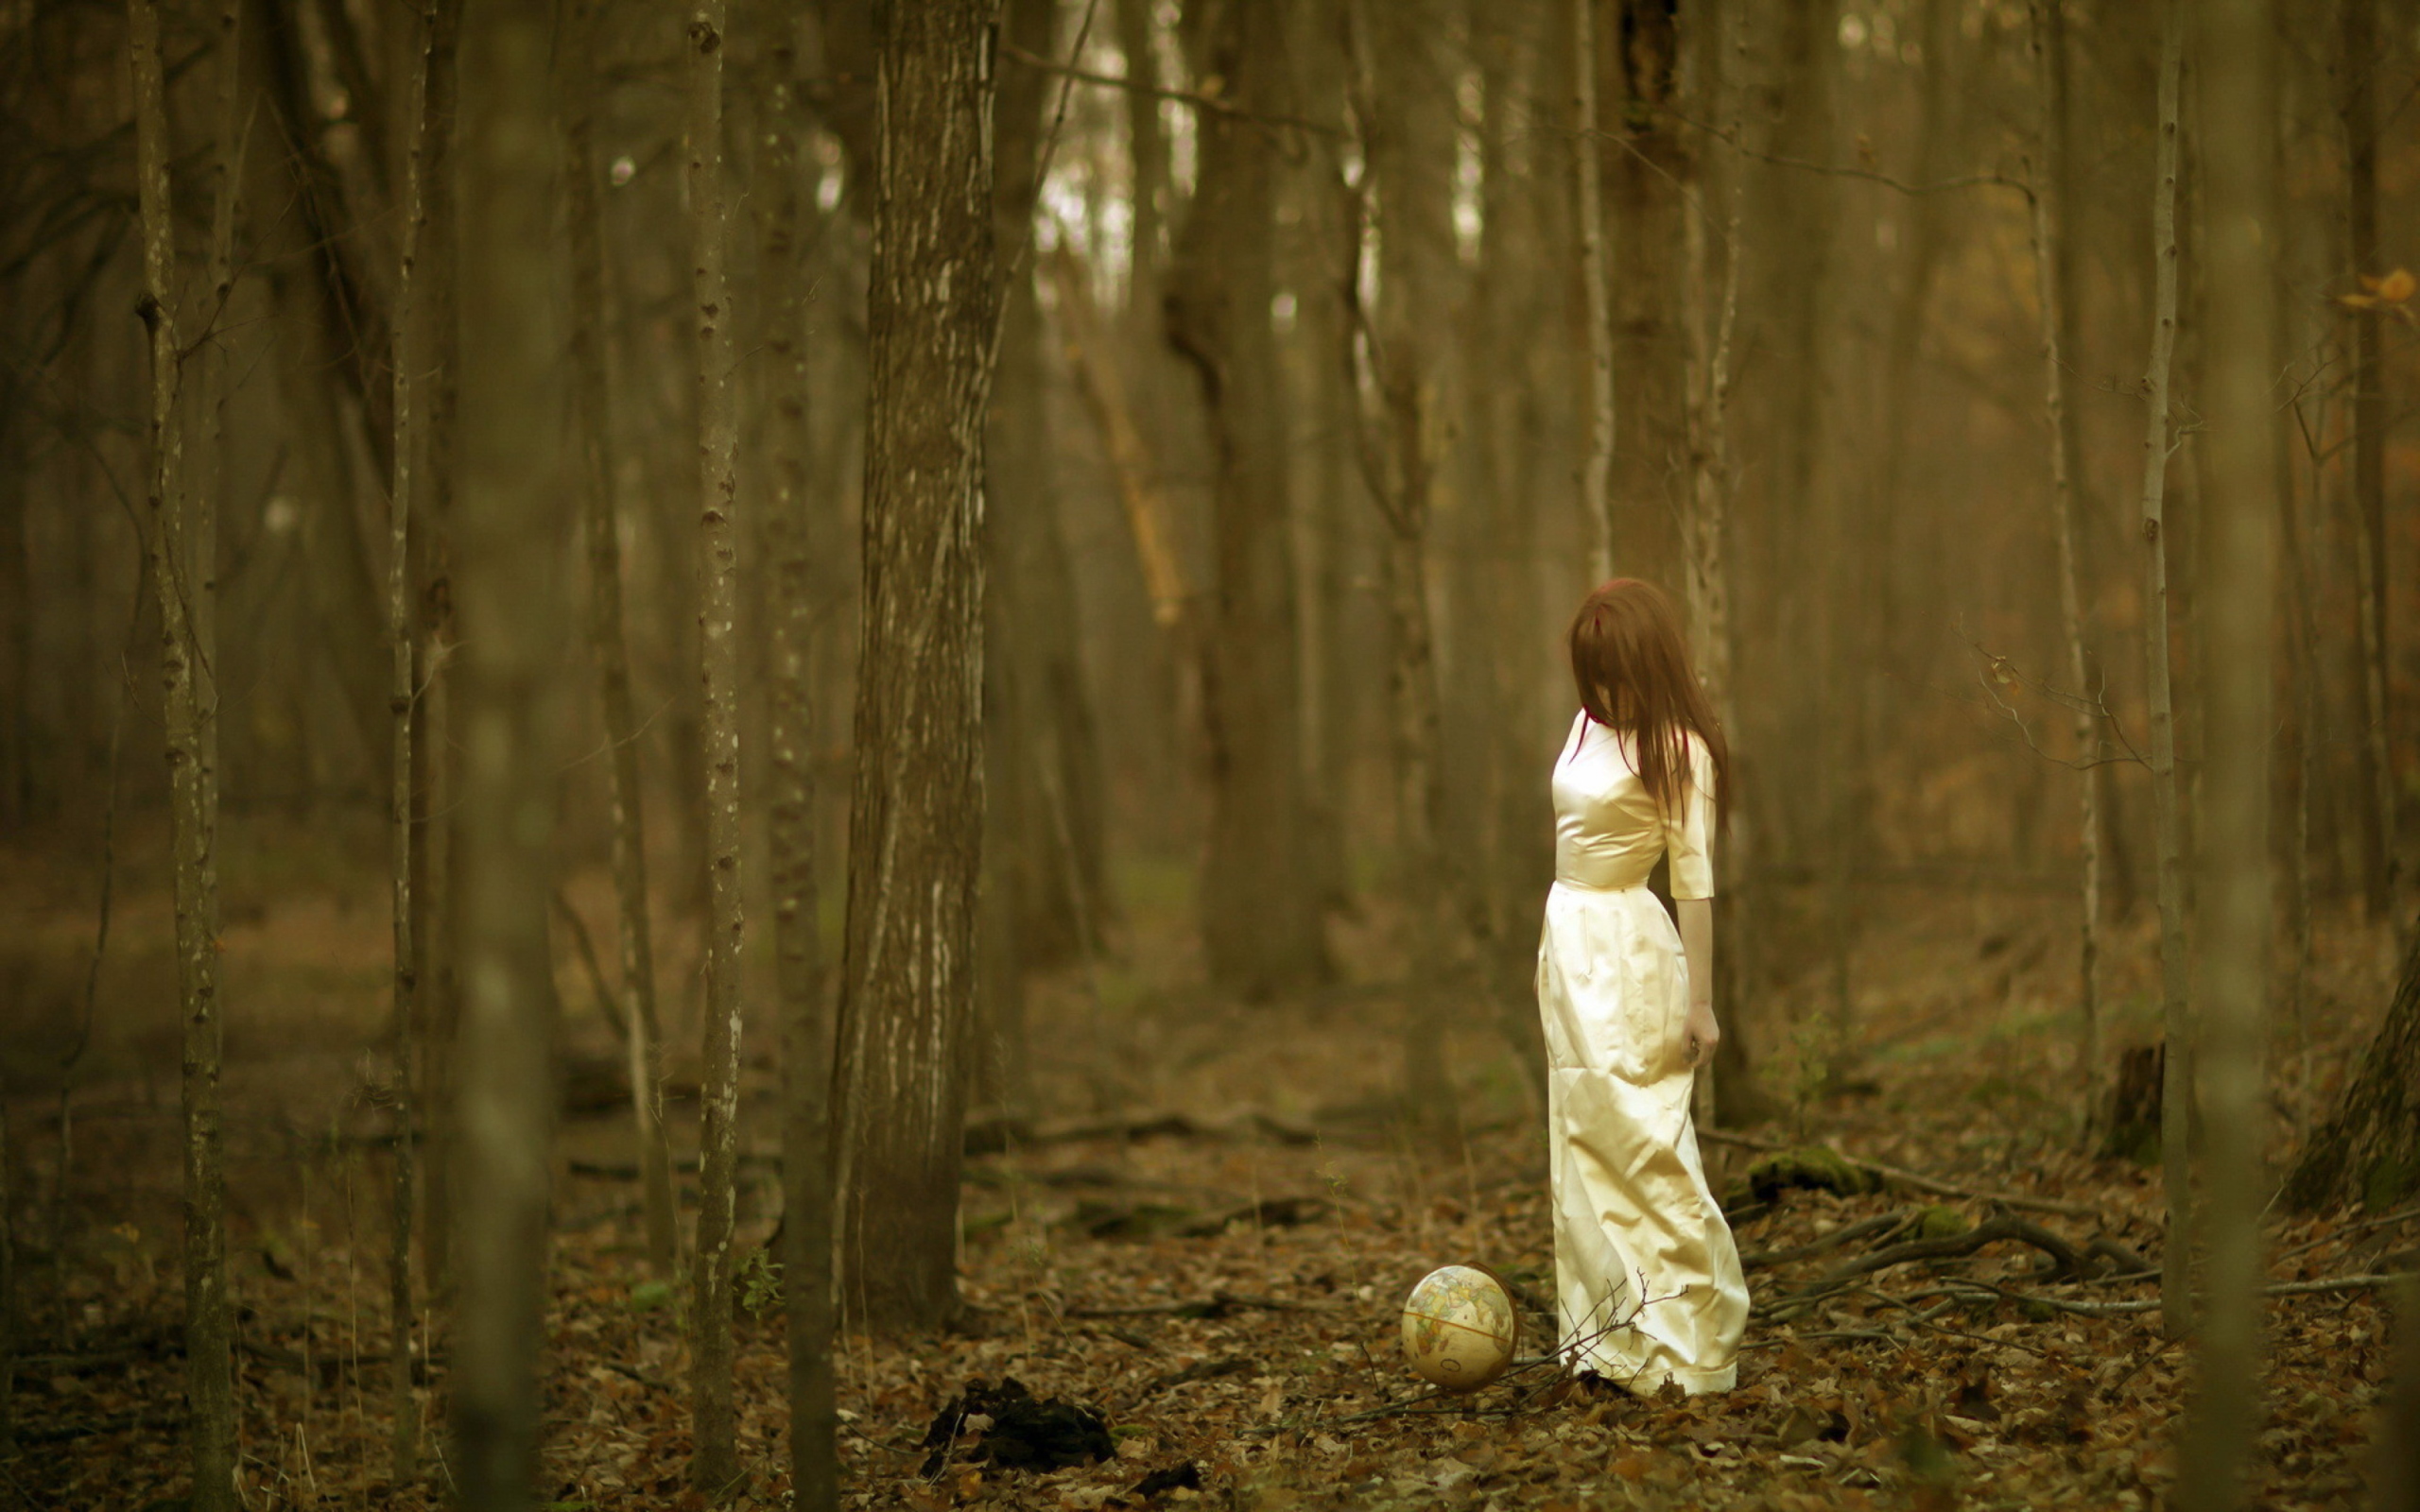 Girl And Globe In Forest wallpaper 2560x1600